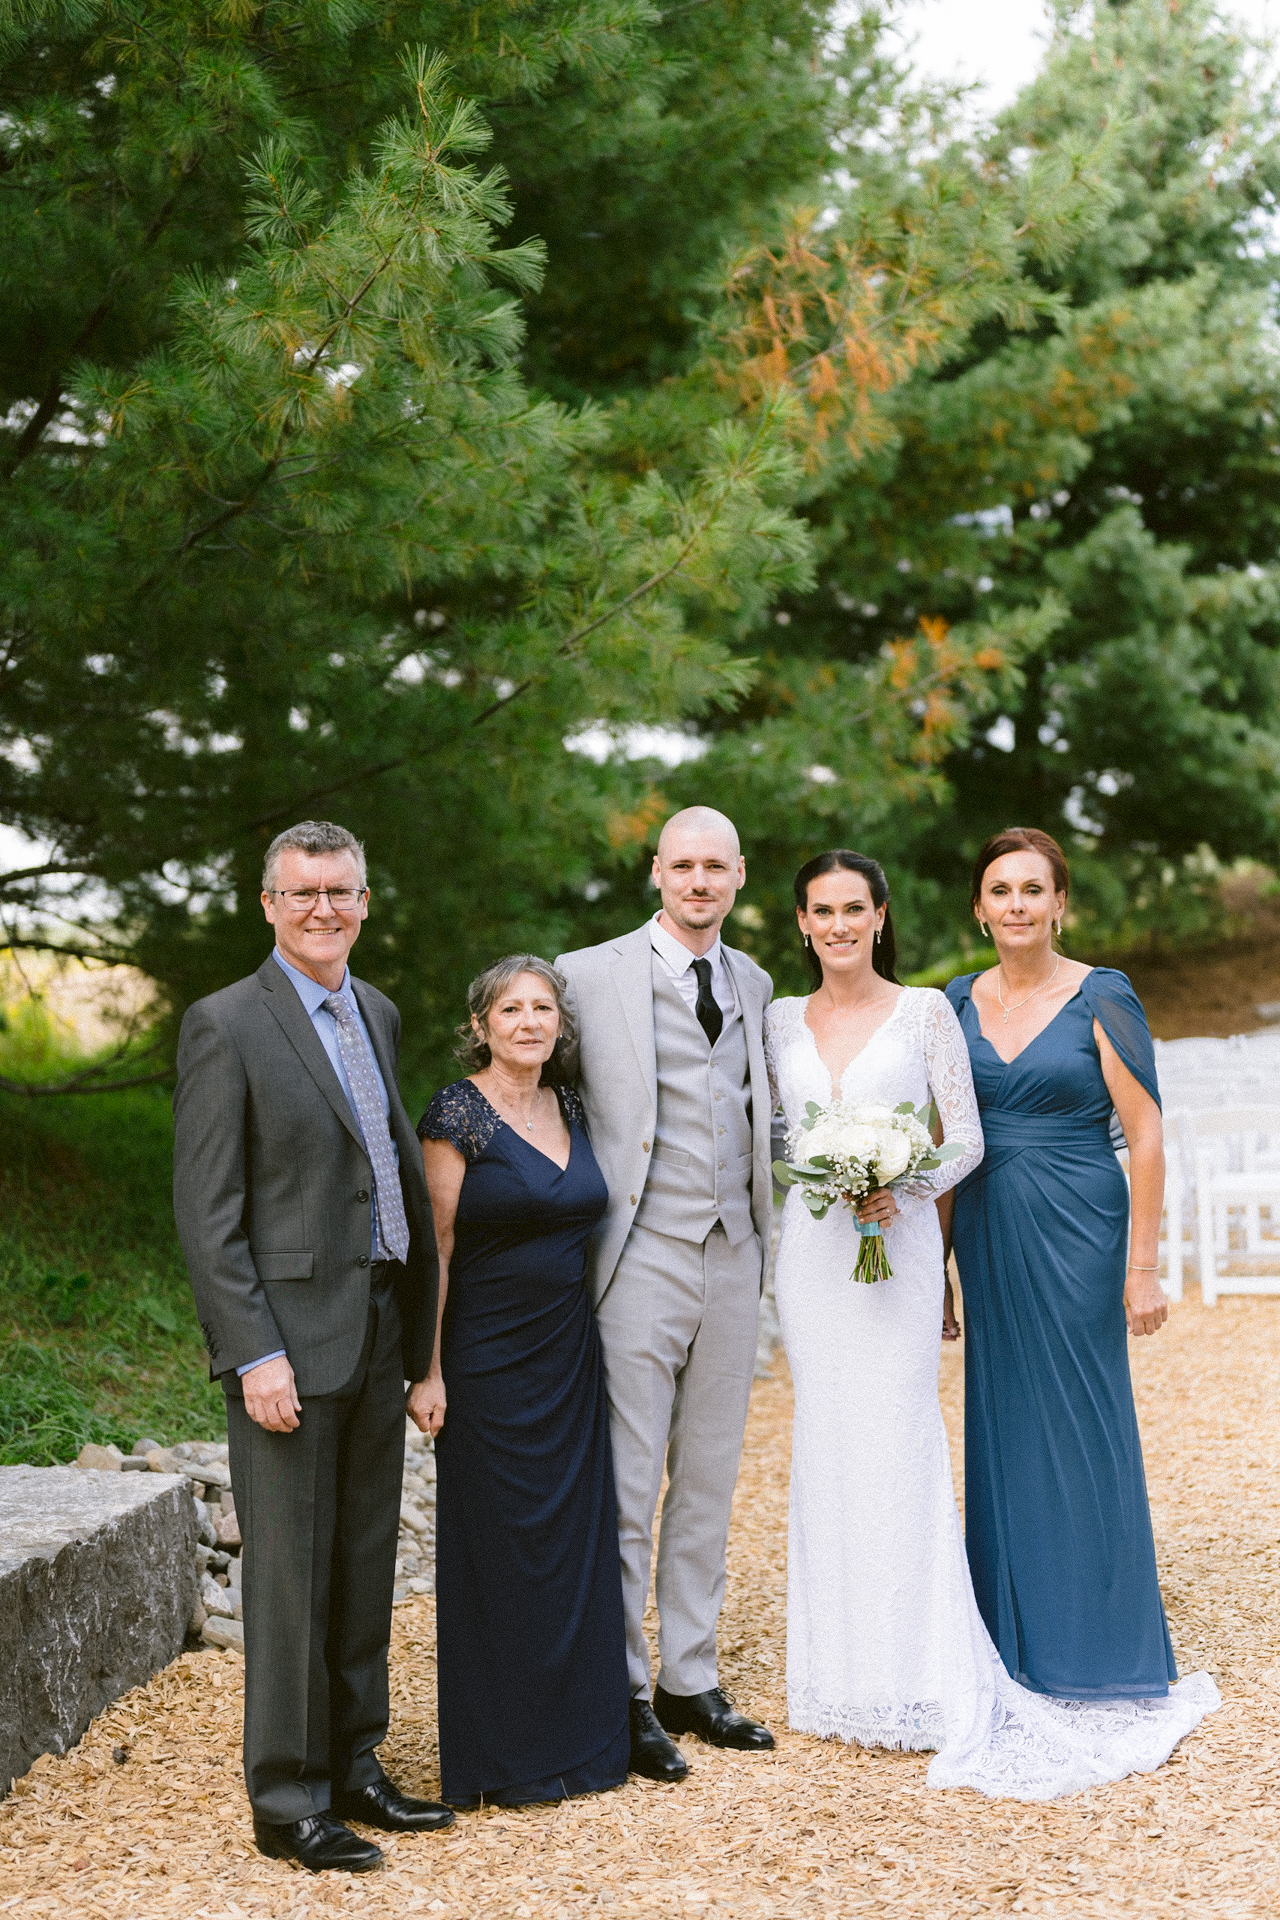 Newlyweds share joyful post-ceremony moment with parents at Cambium Farms wedding.